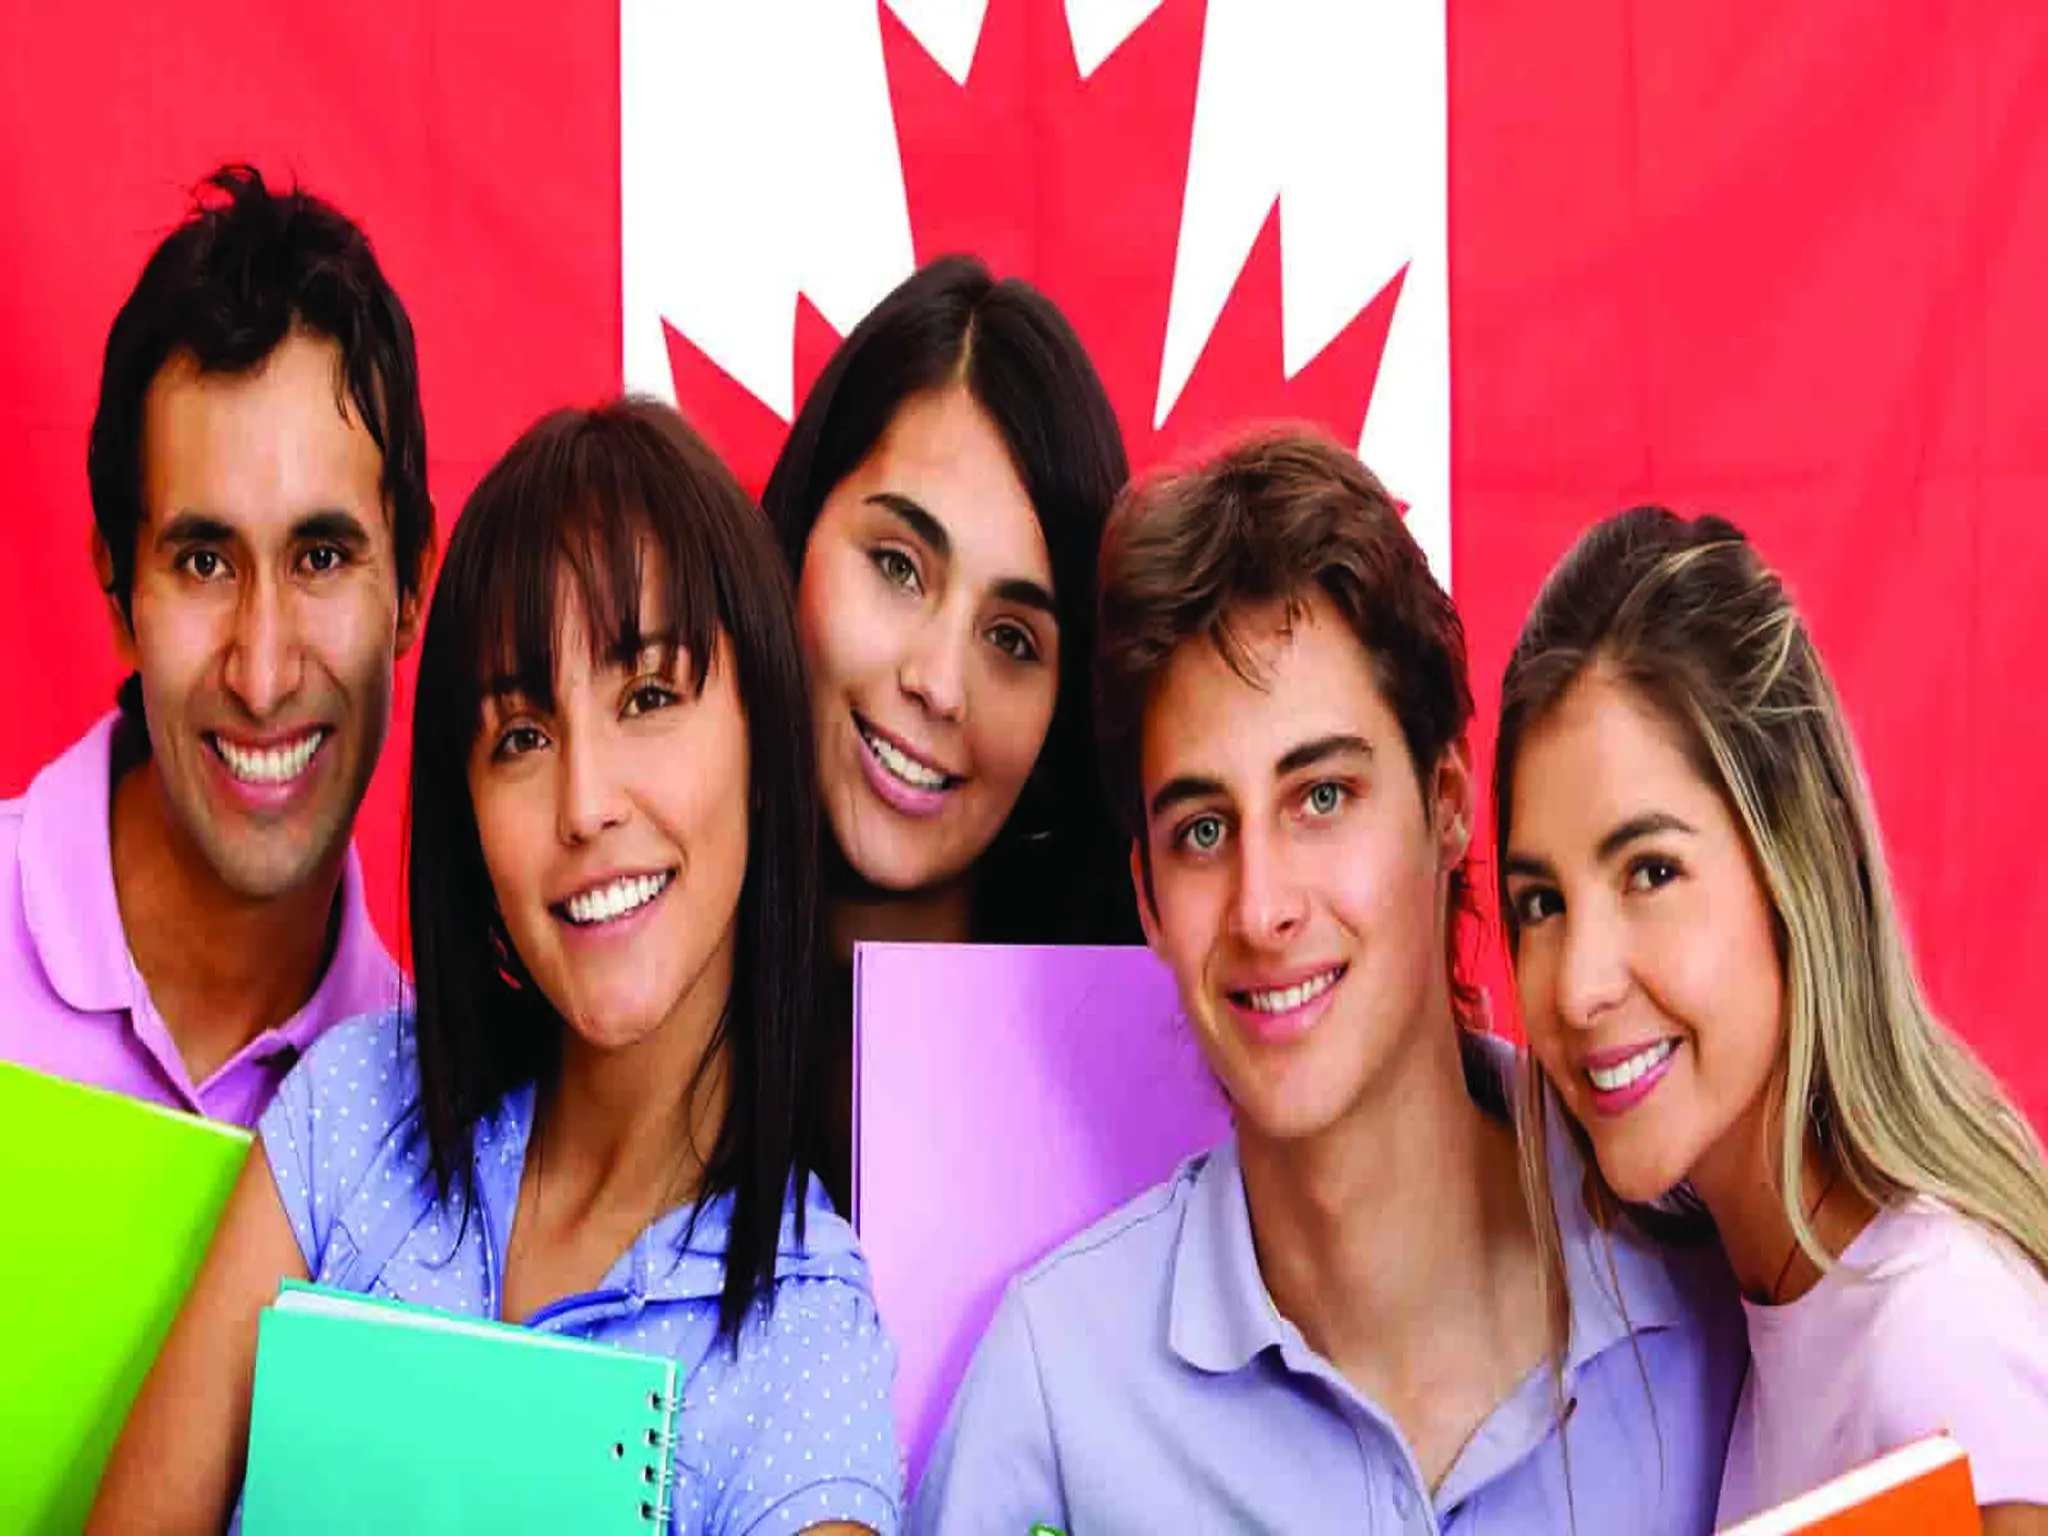 Canada officially decides to amend the rules for work permits for international students